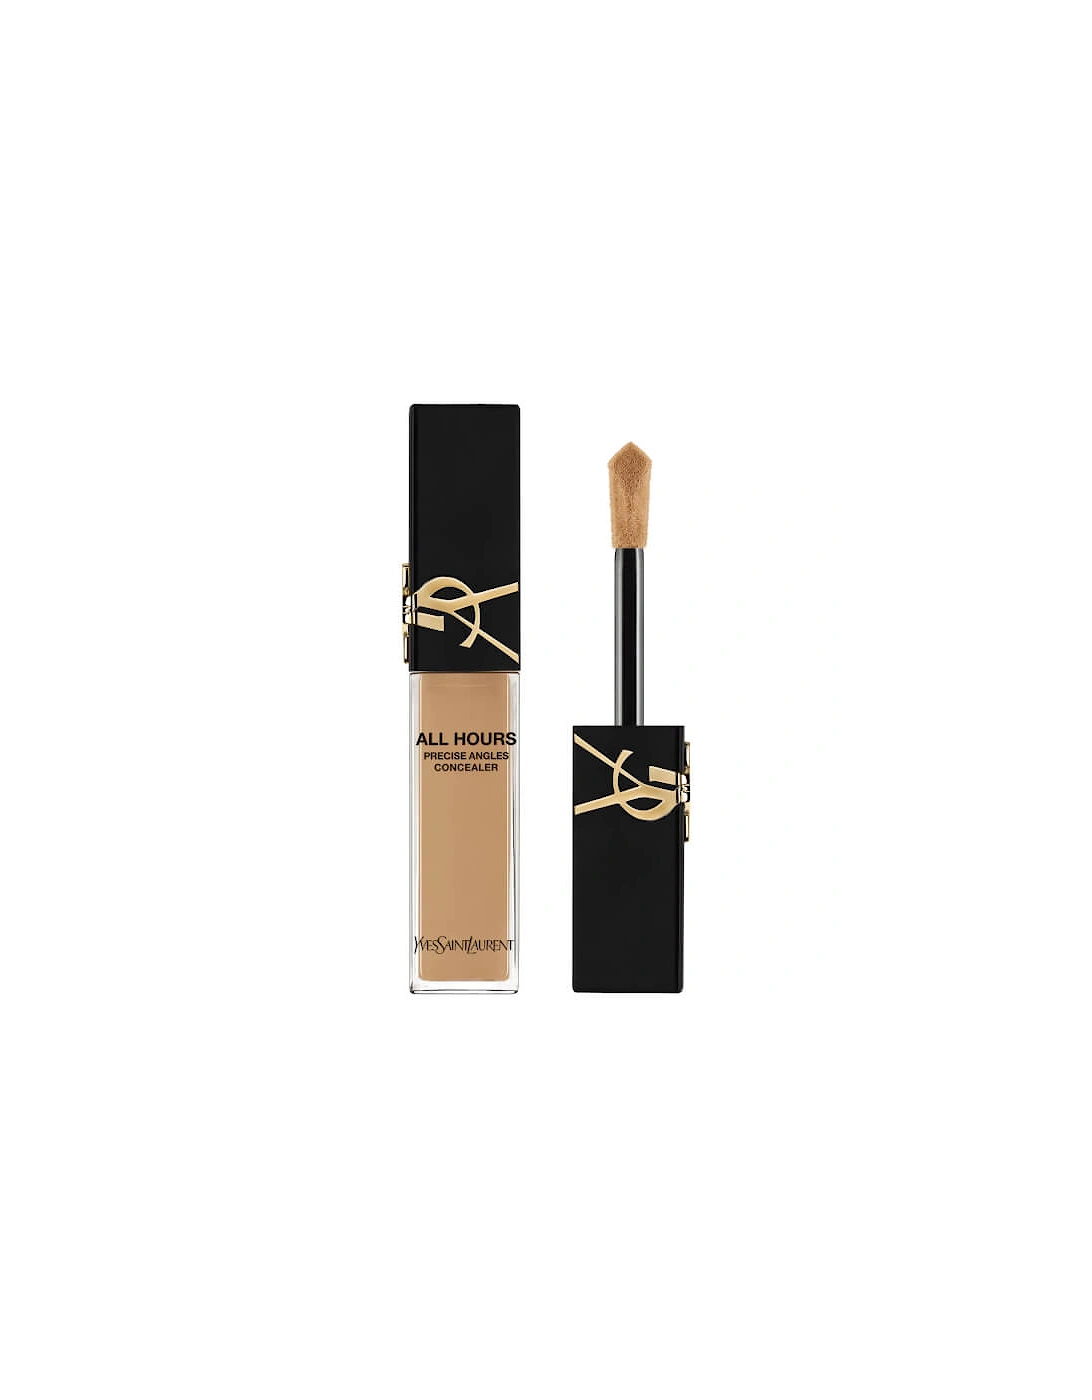 Yves Saint Laurent All Hours Concealer - MN1, 2 of 1